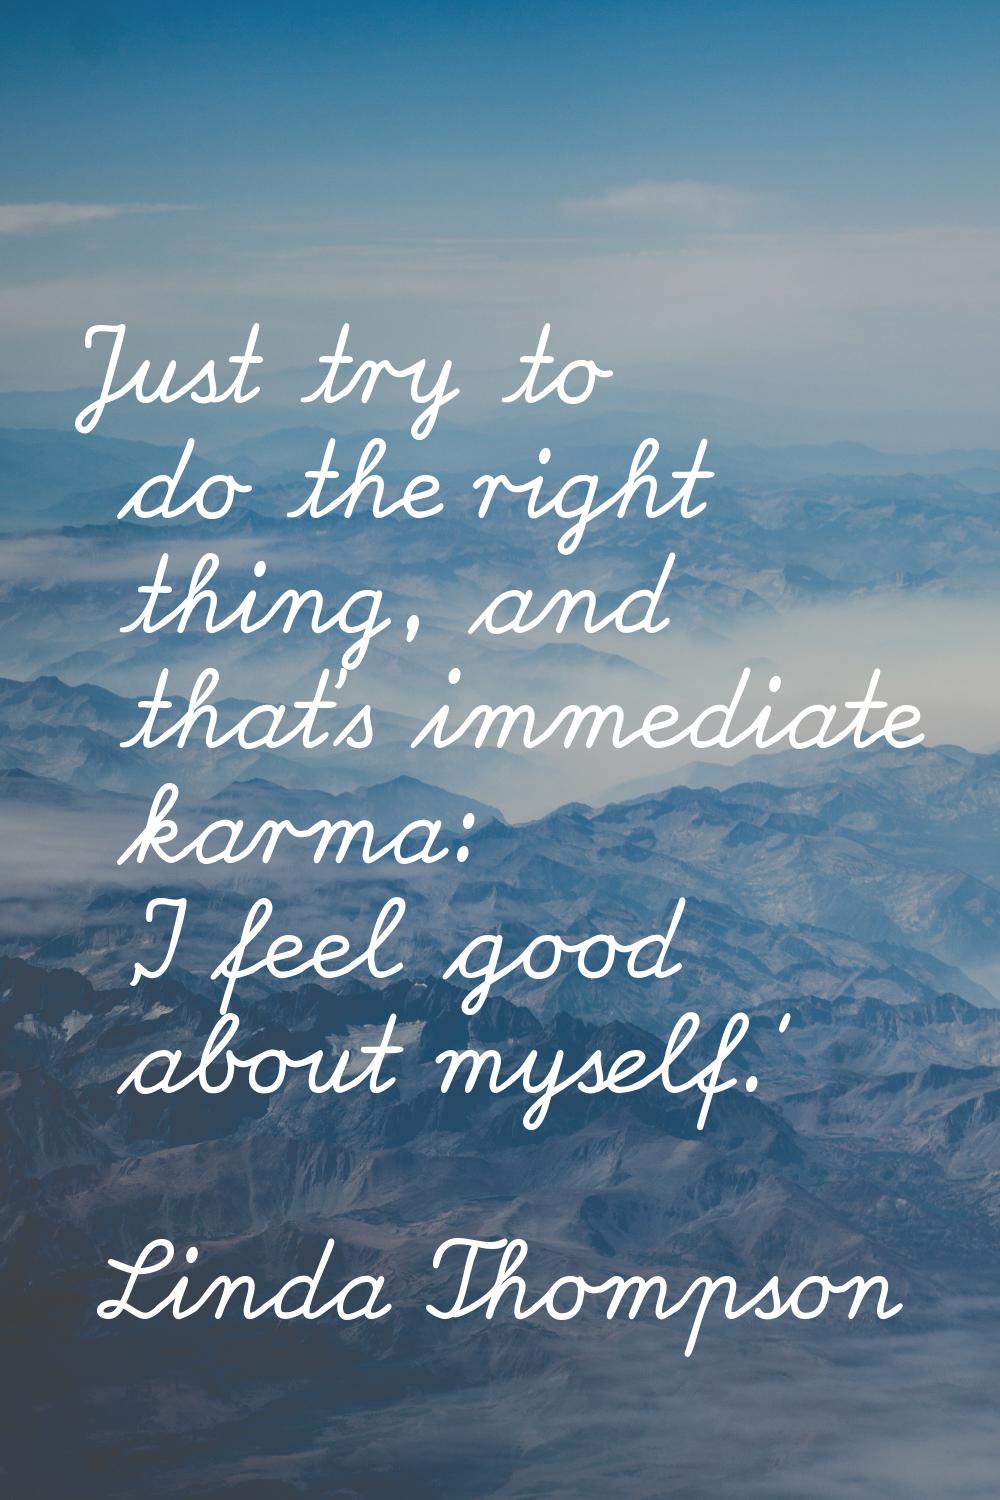 Just try to do the right thing, and that's immediate karma: 'I feel good about myself.'